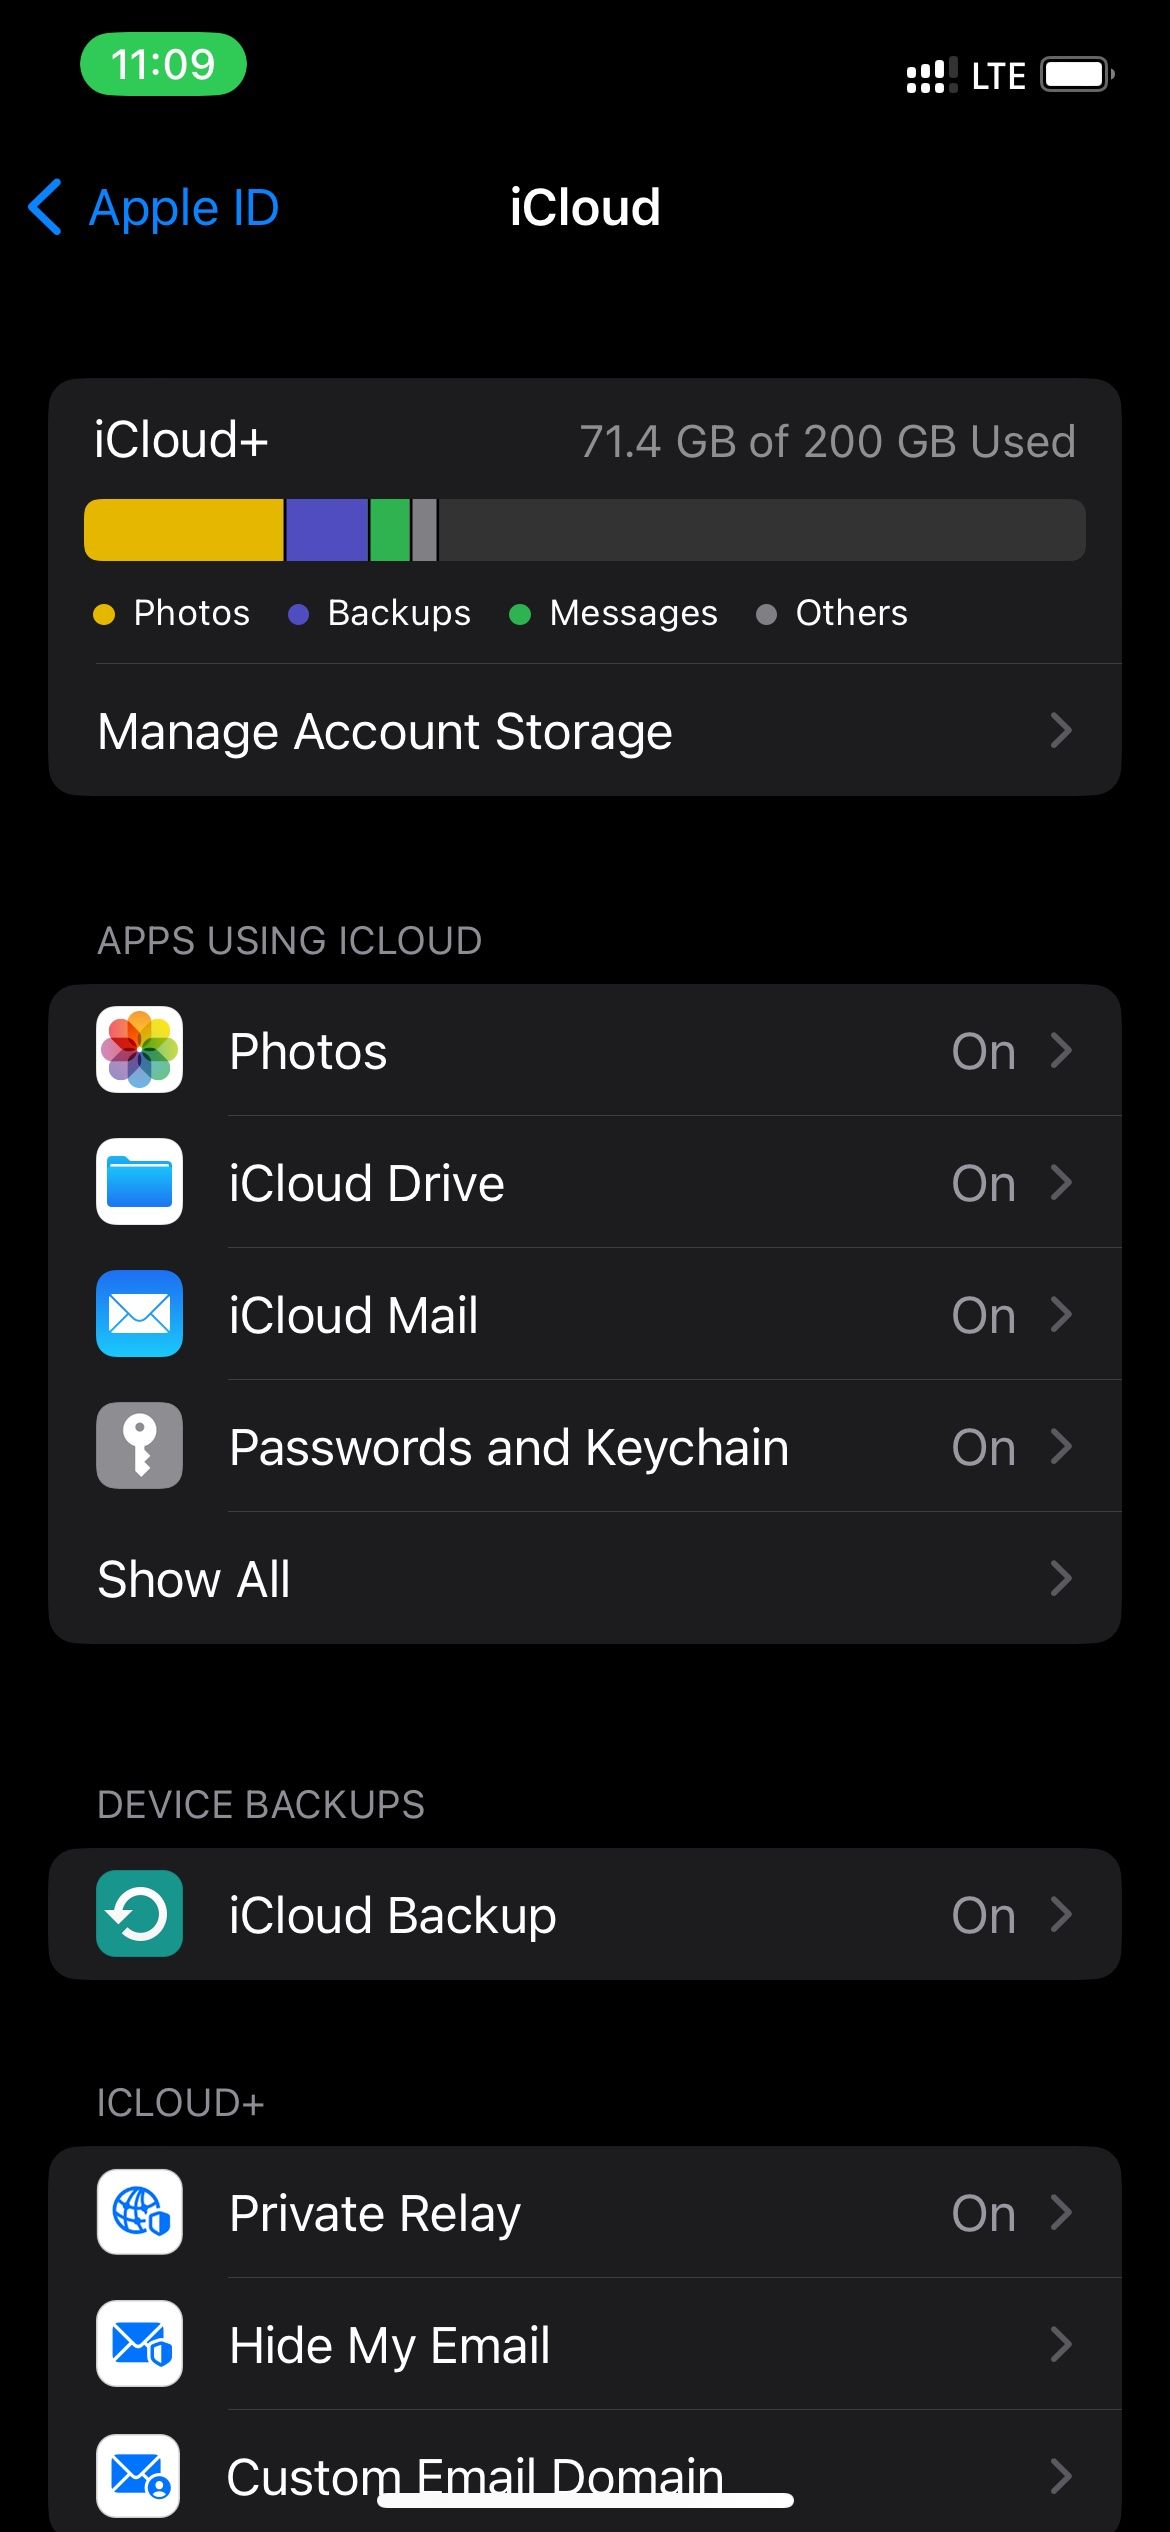 Tap Show All under Apps Using iCloud section